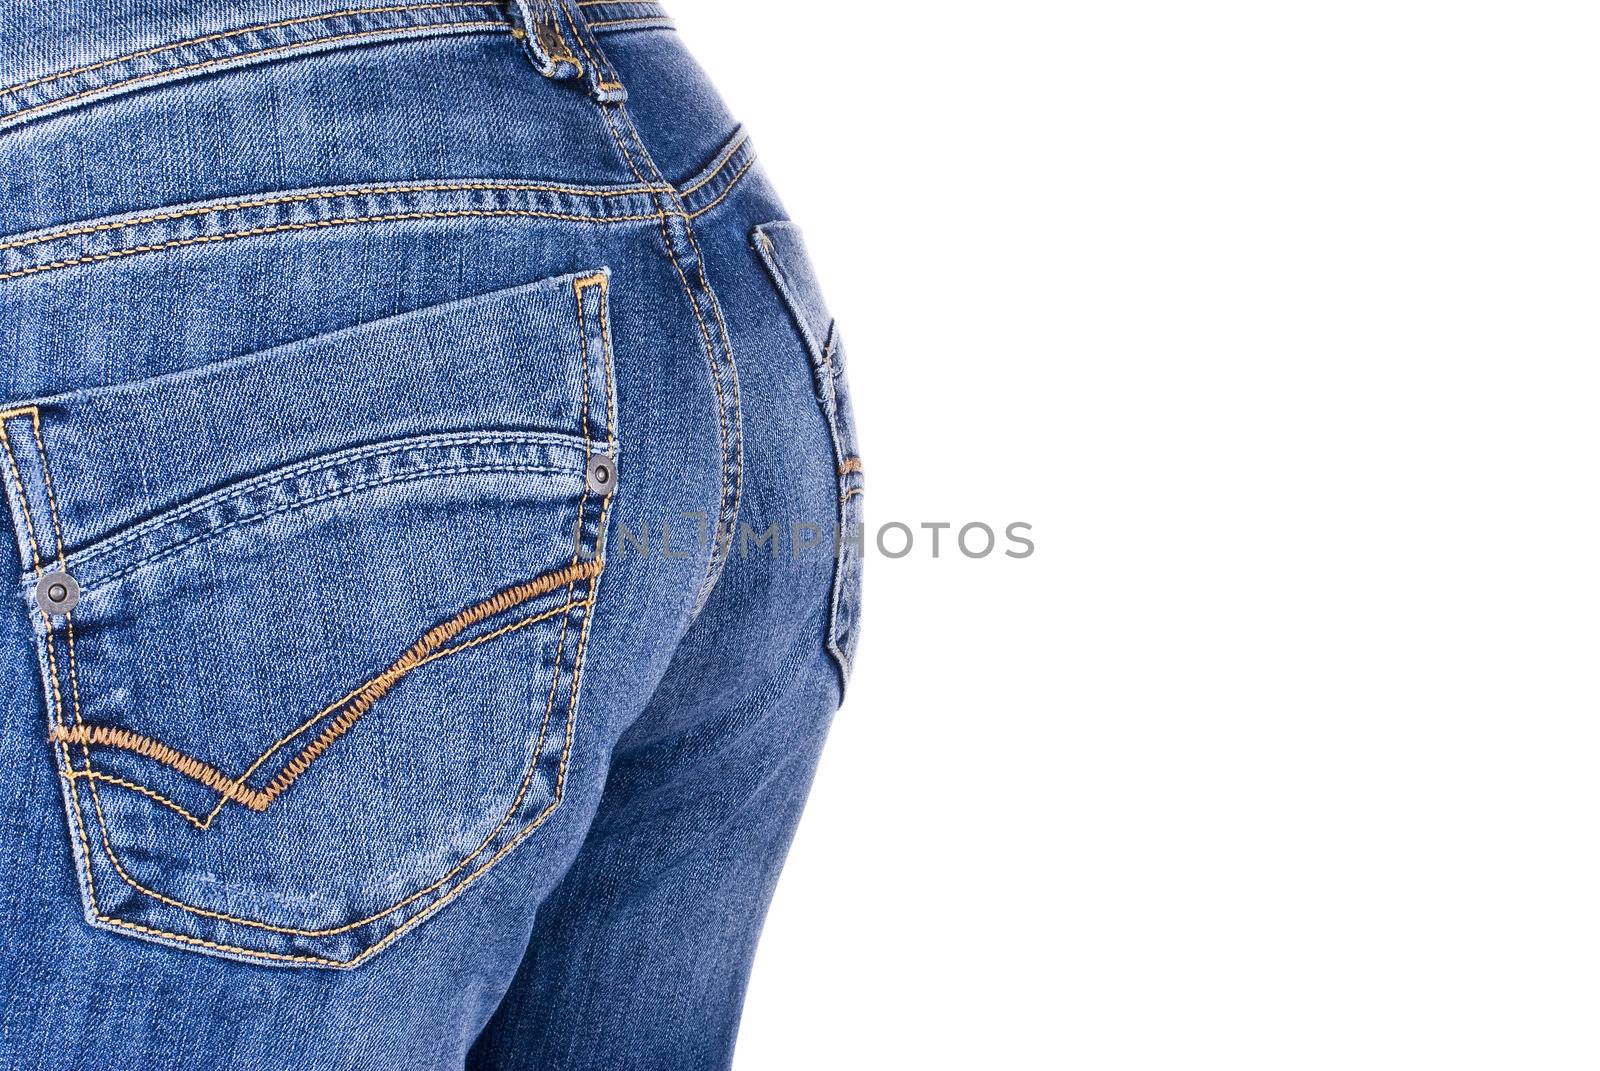 women wearing a pair of blue jeans by caldix